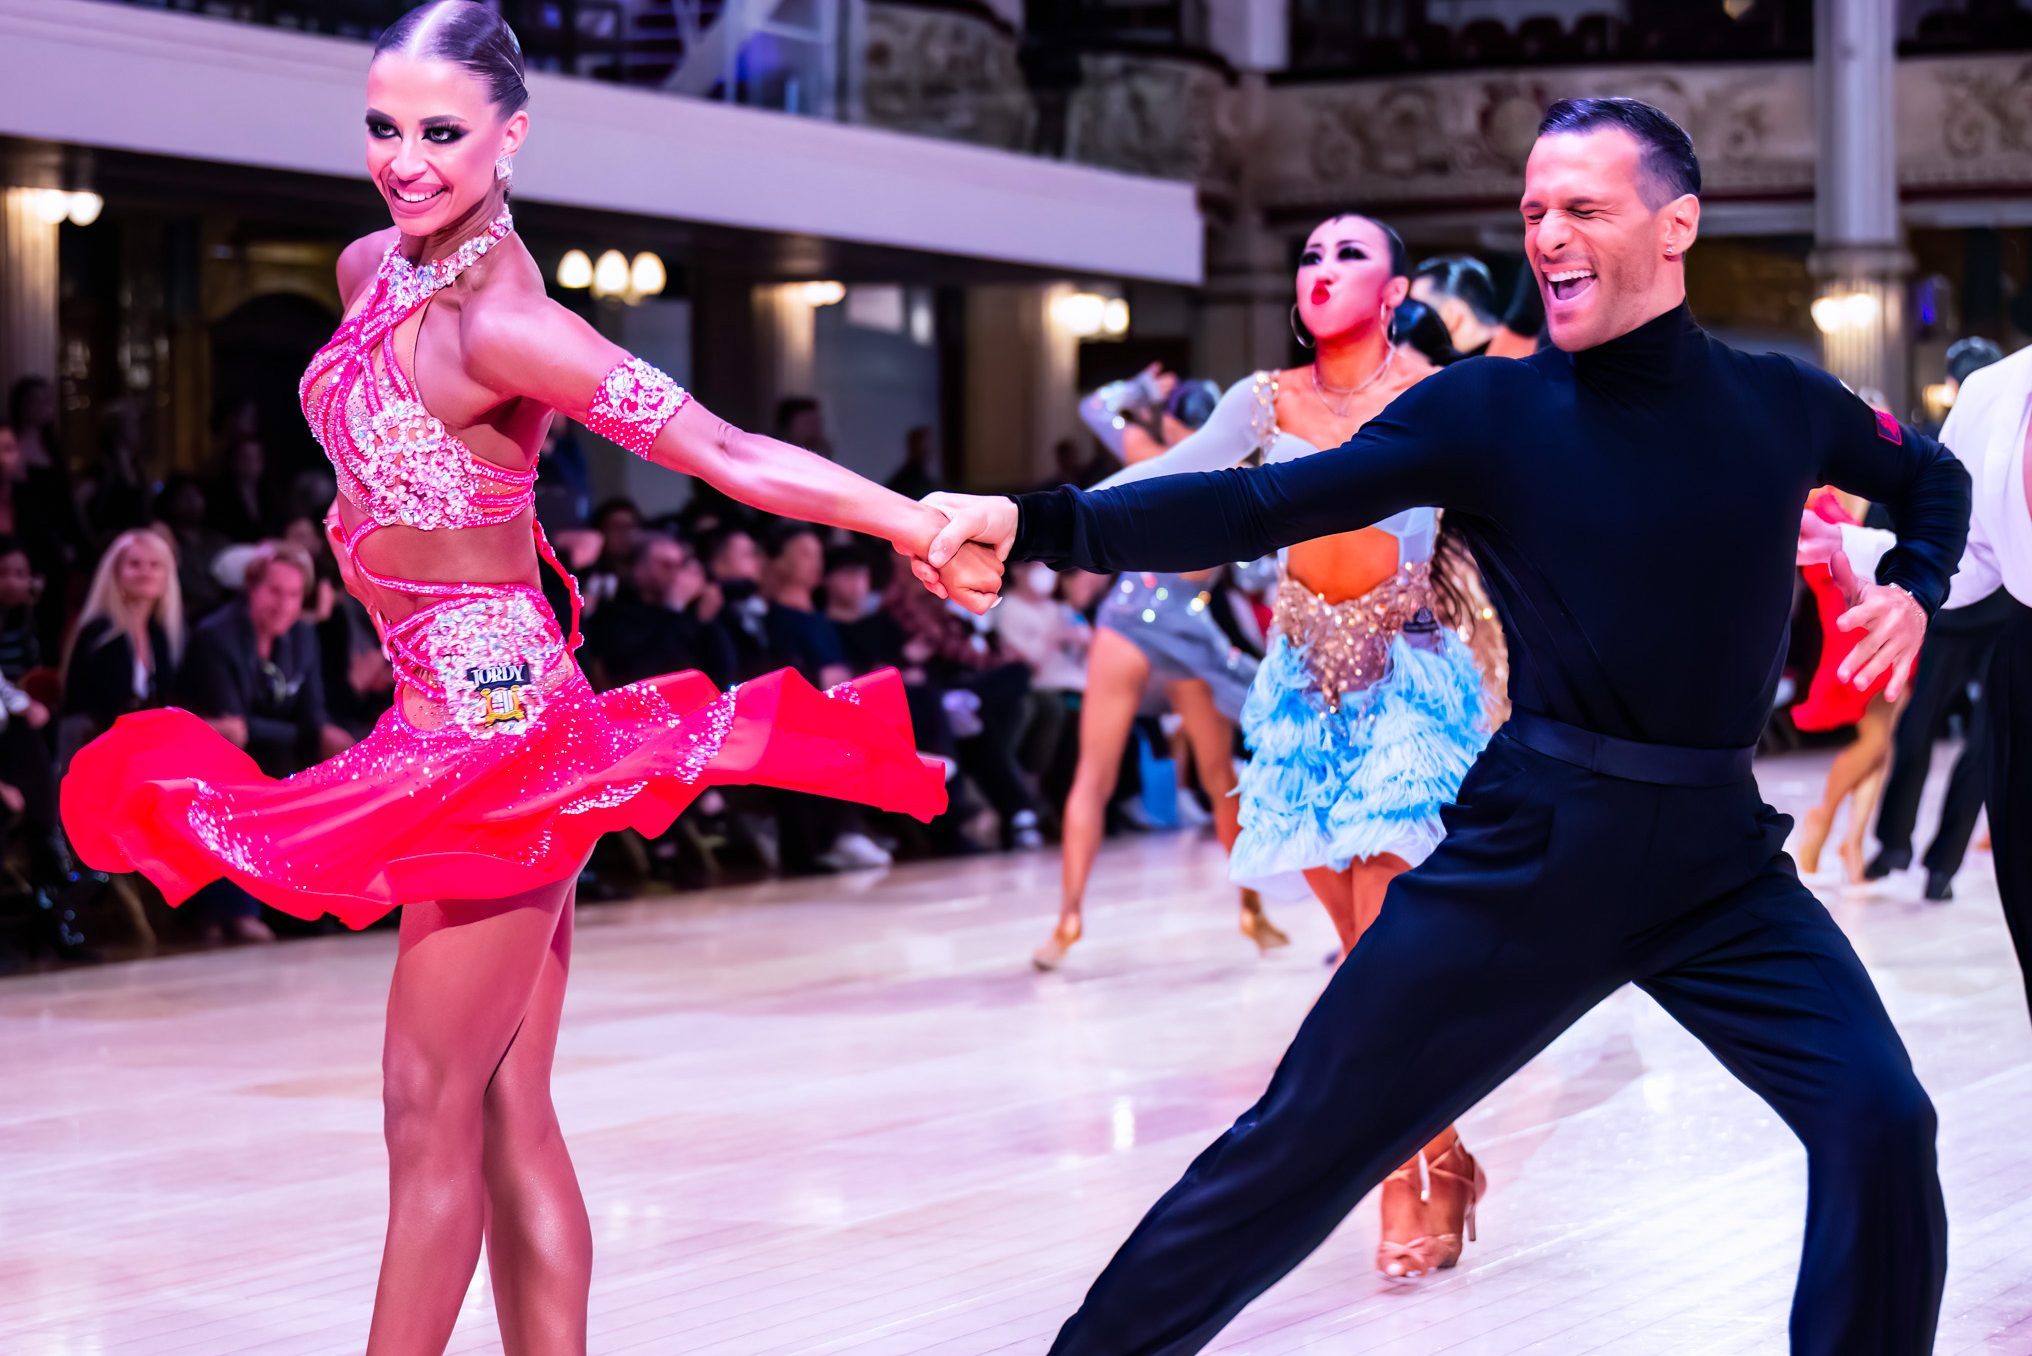 NW business briefs: Blackpool Dance Festival; Together; Seddon; Manchester Airport; Lancashire Skills and Employment Hub; Full Power Cacao